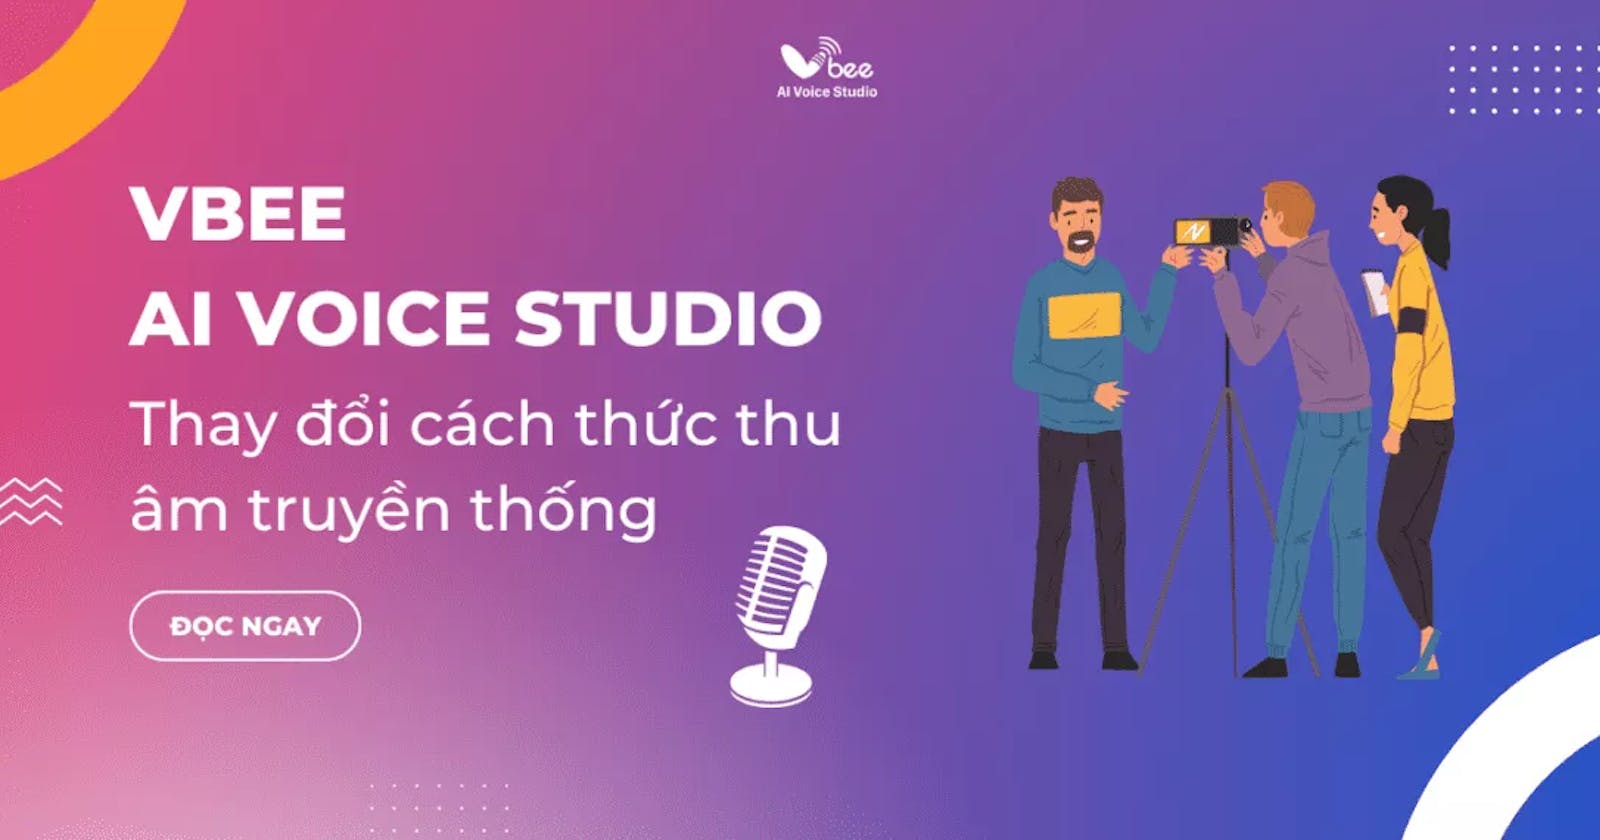 Vbee AI Voice Studio – Changing the traditional way of recording